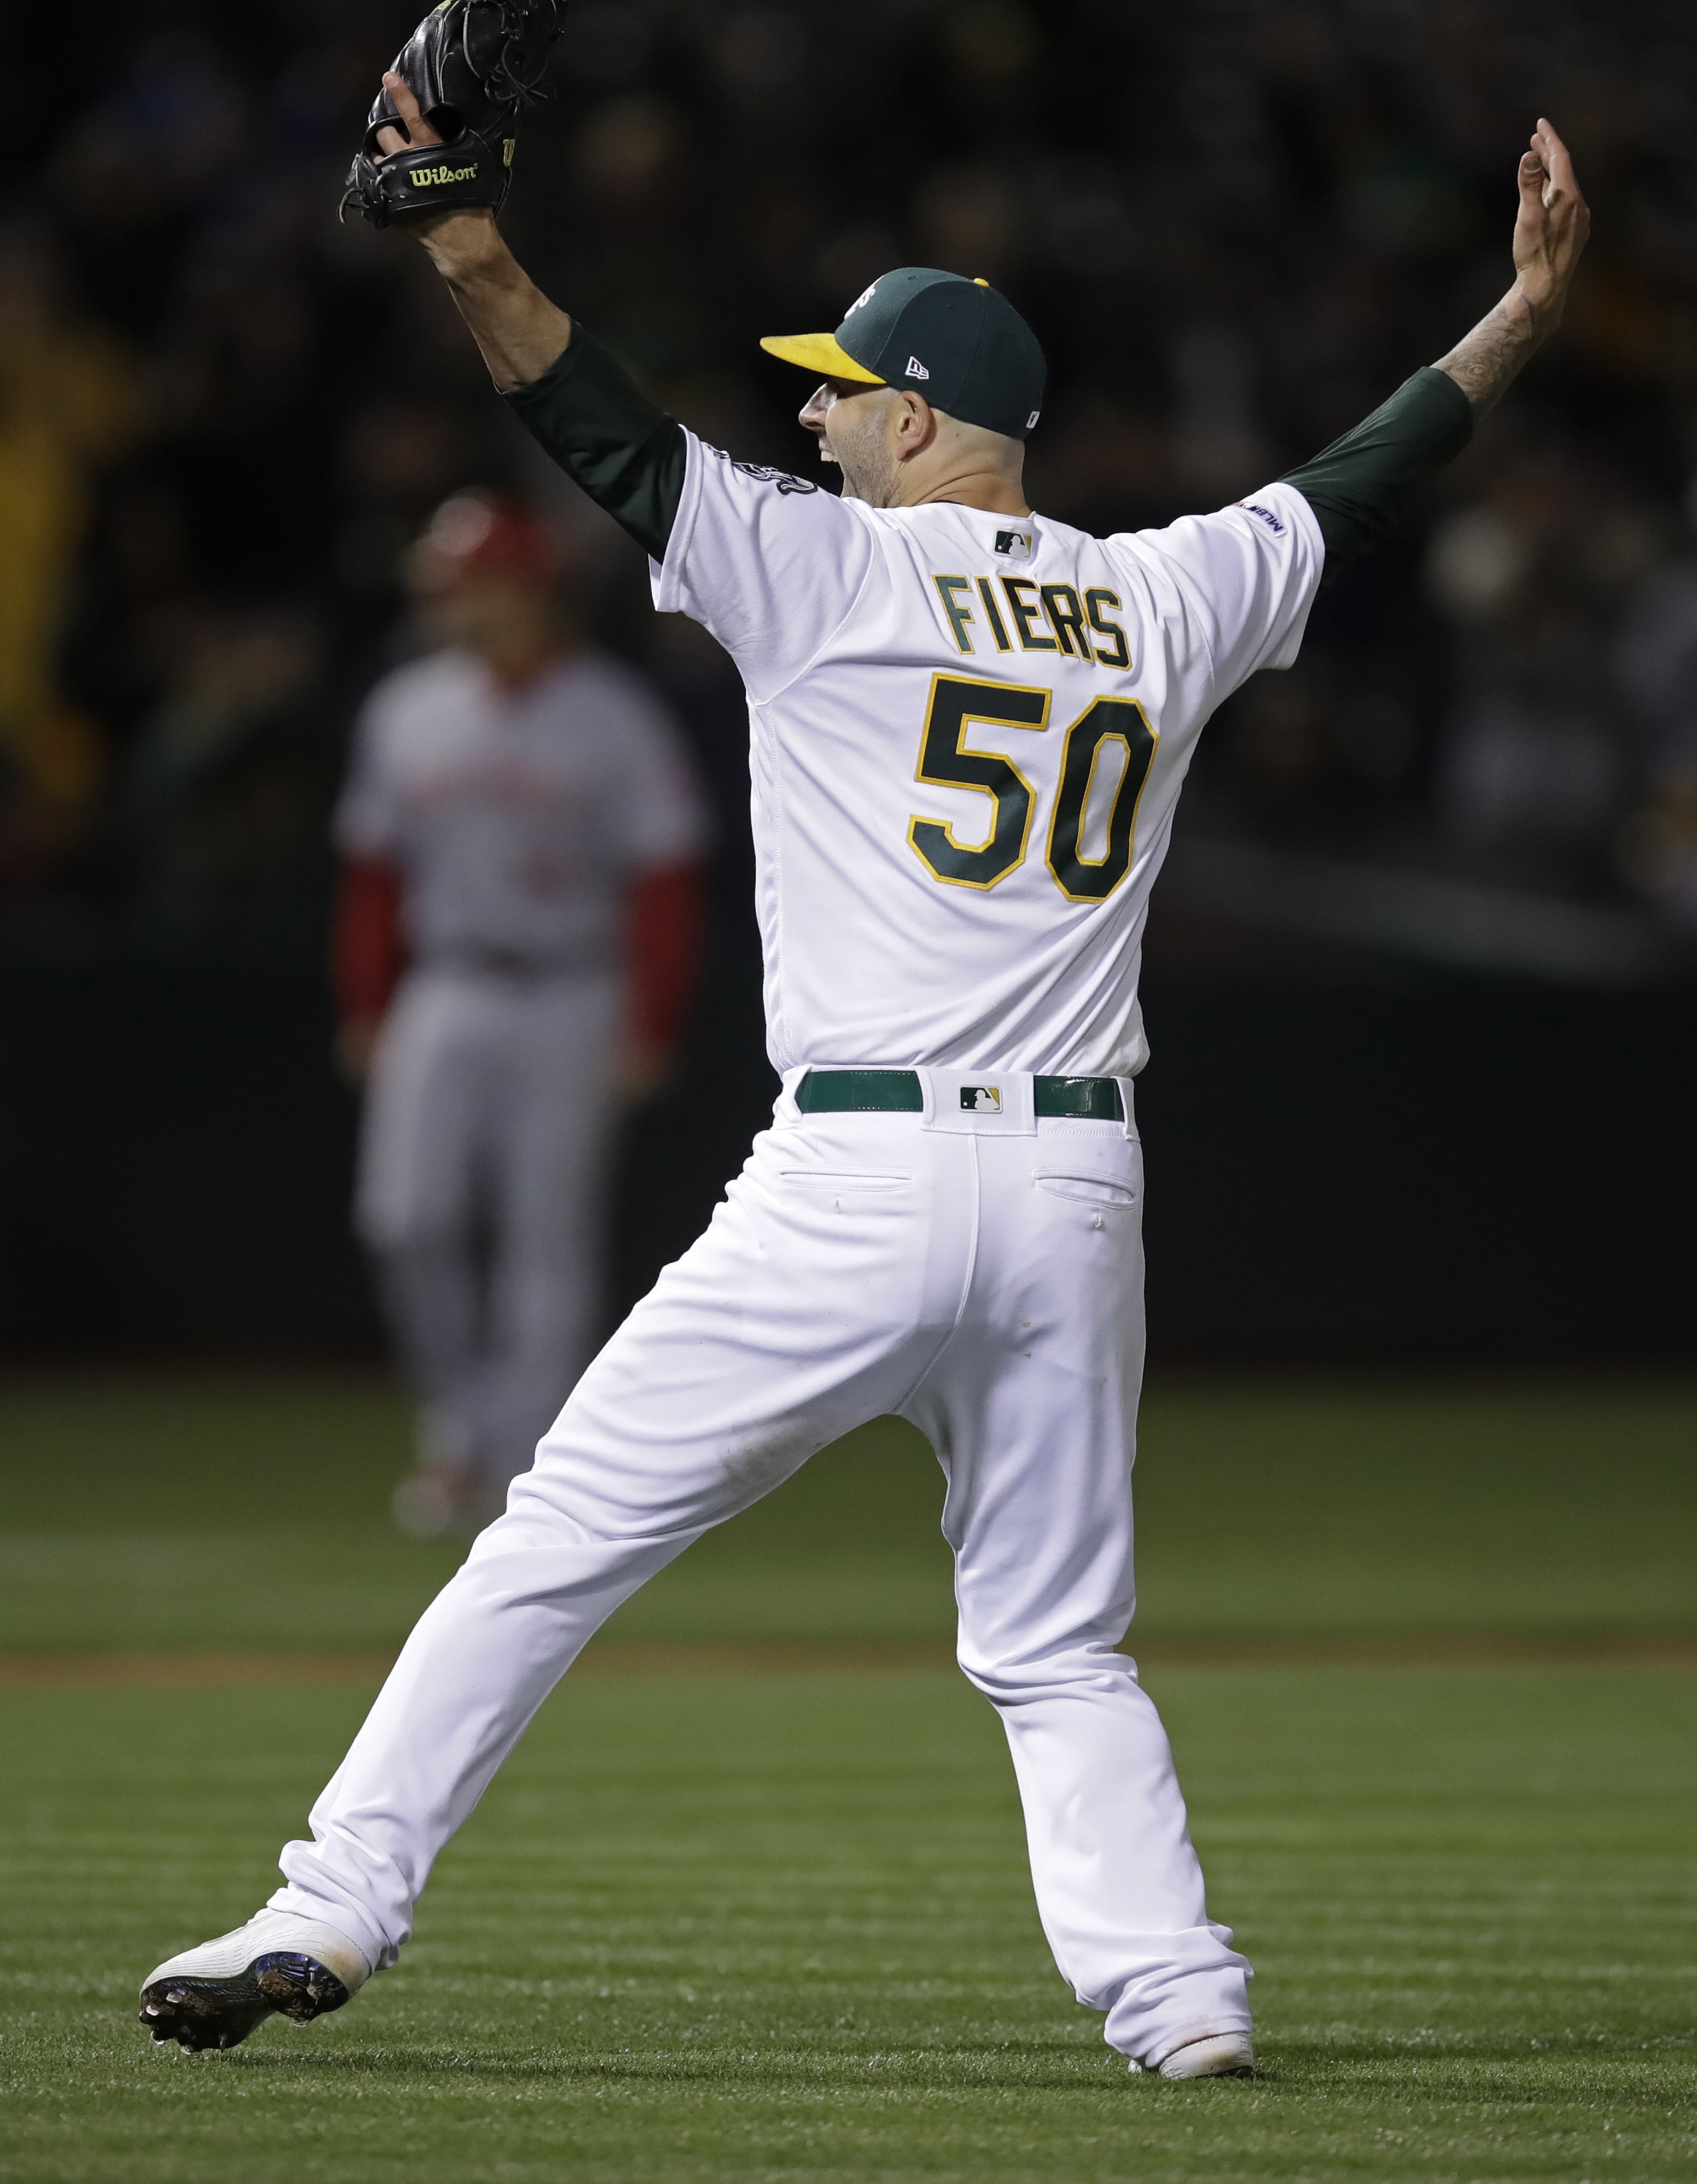 Oakland Athletics' Mike Fiers celebrates after pitching a no hitter against the Cincinnati Reds at the end of a baseball game Tuesday, May 7, 2019, in Oakland, Calif.